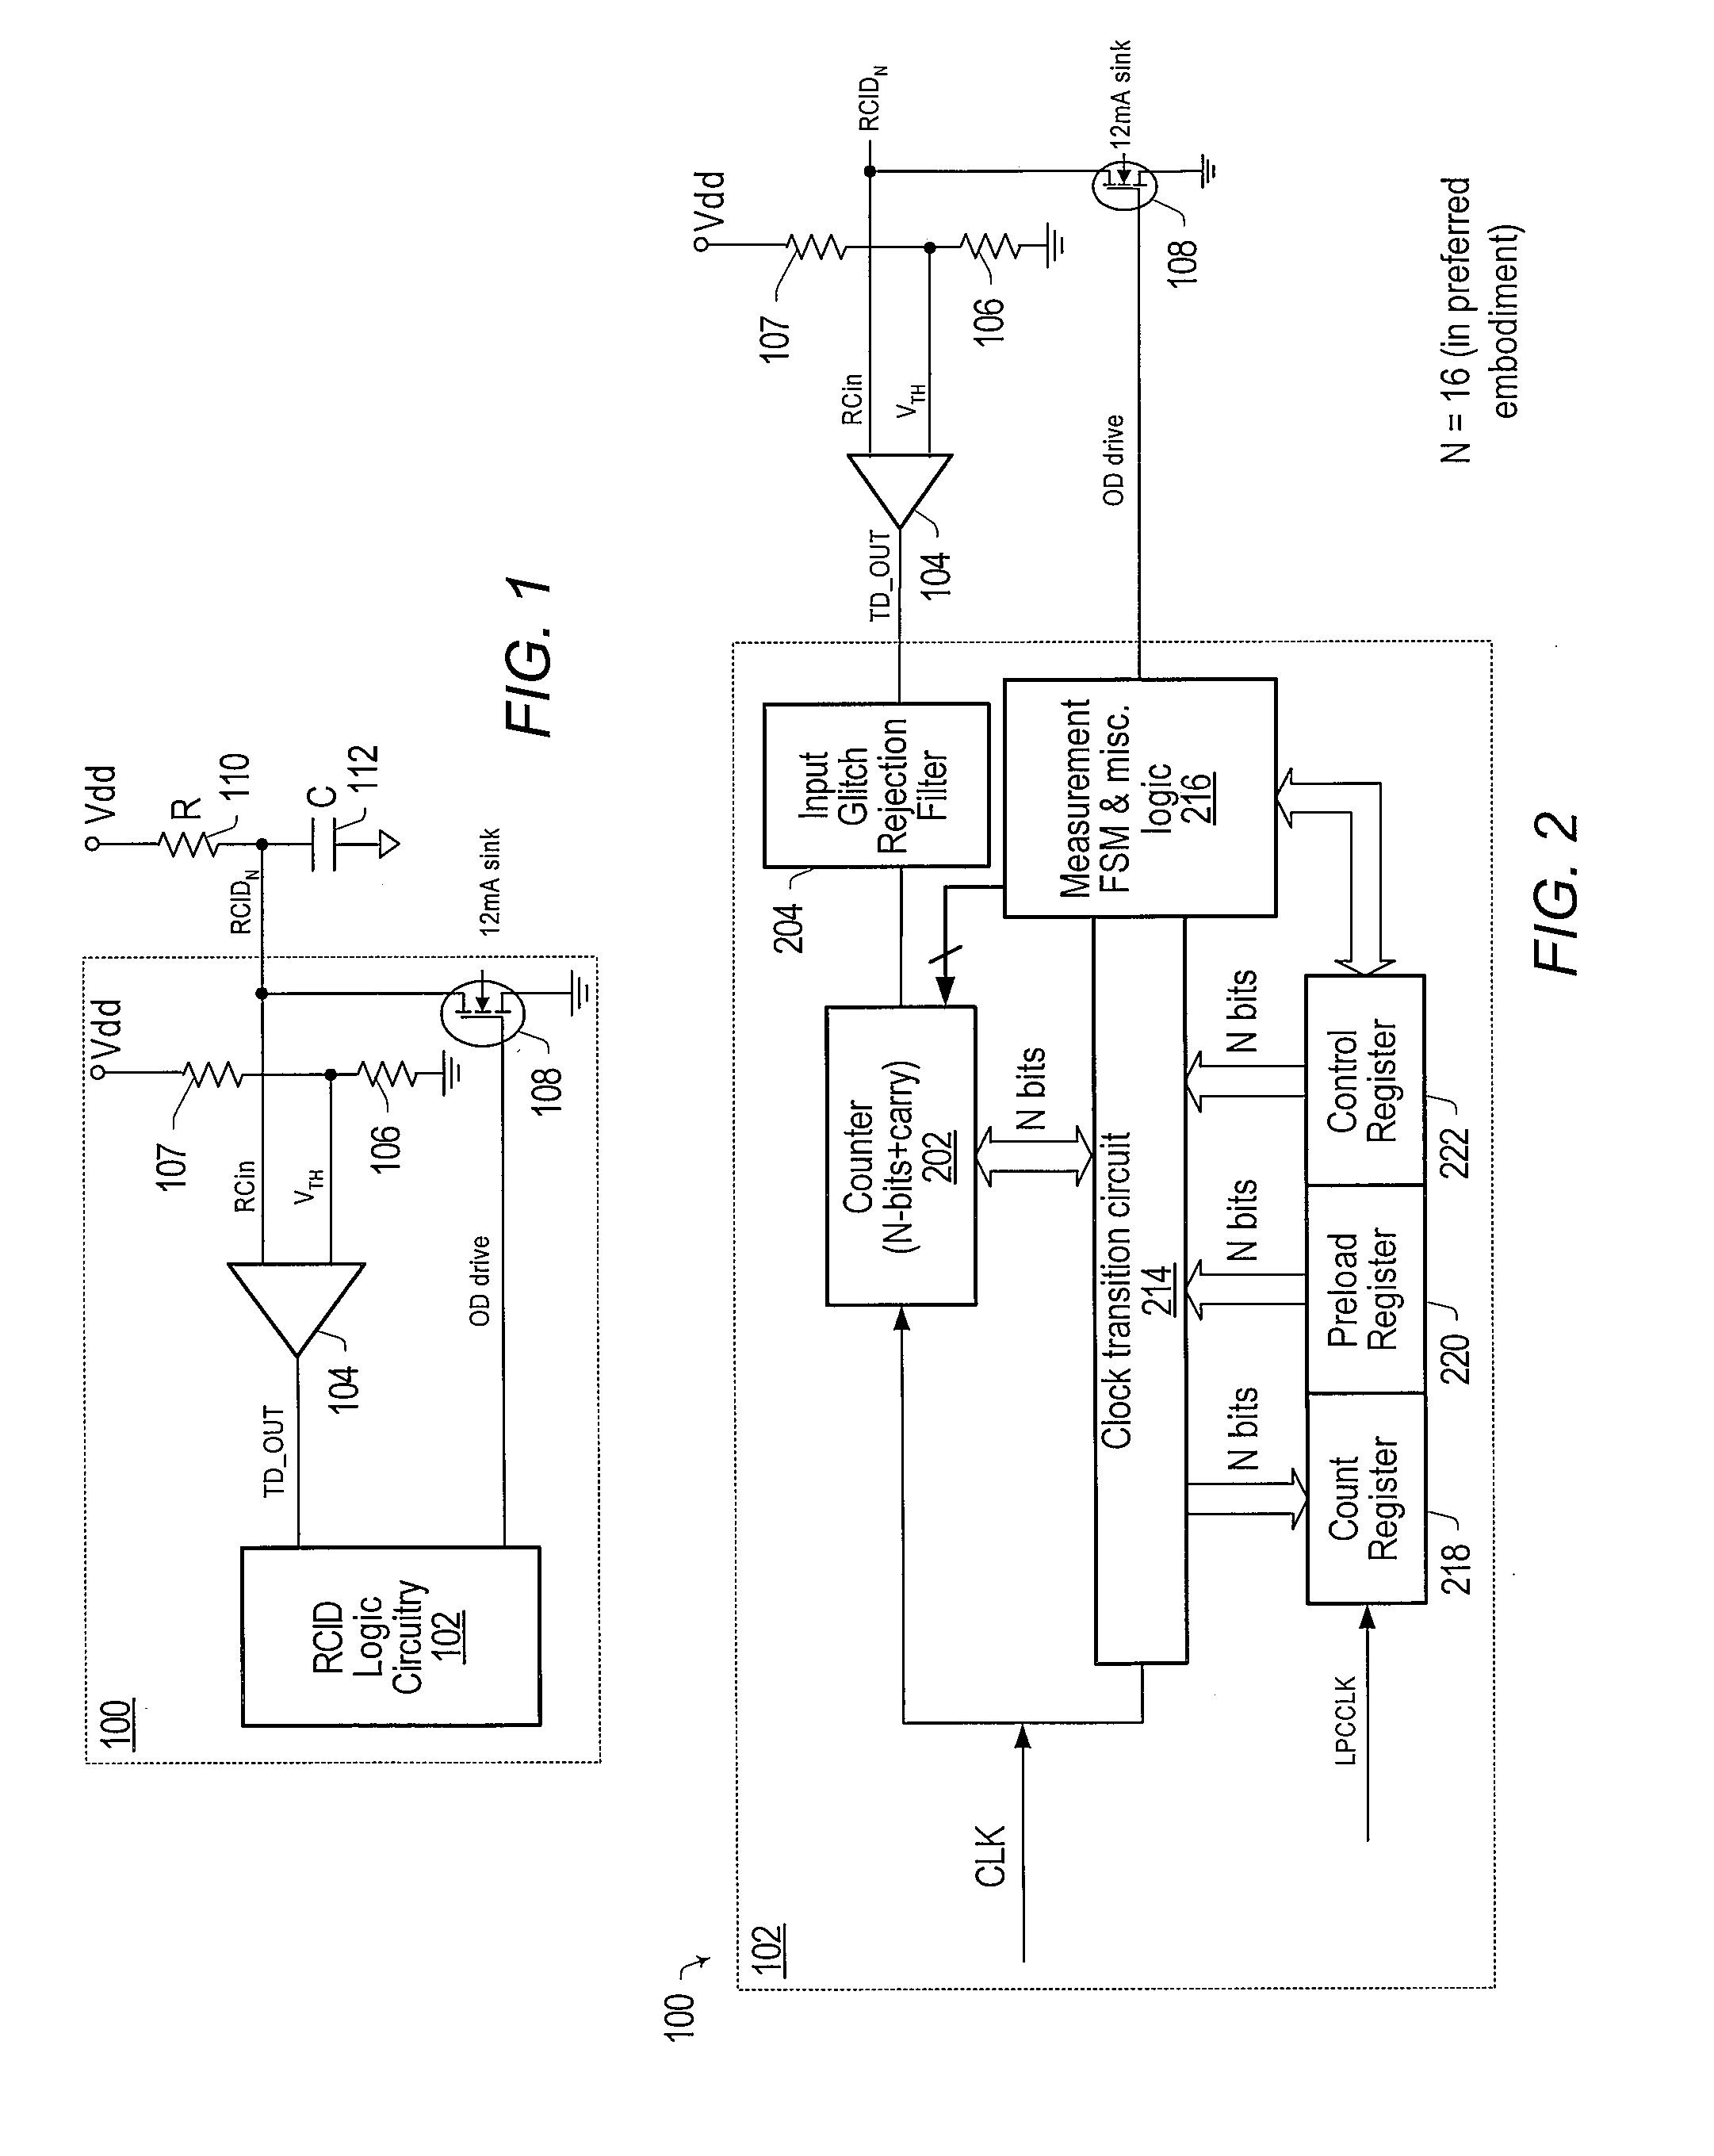 Resistor/Capacitor Based Identification Detection